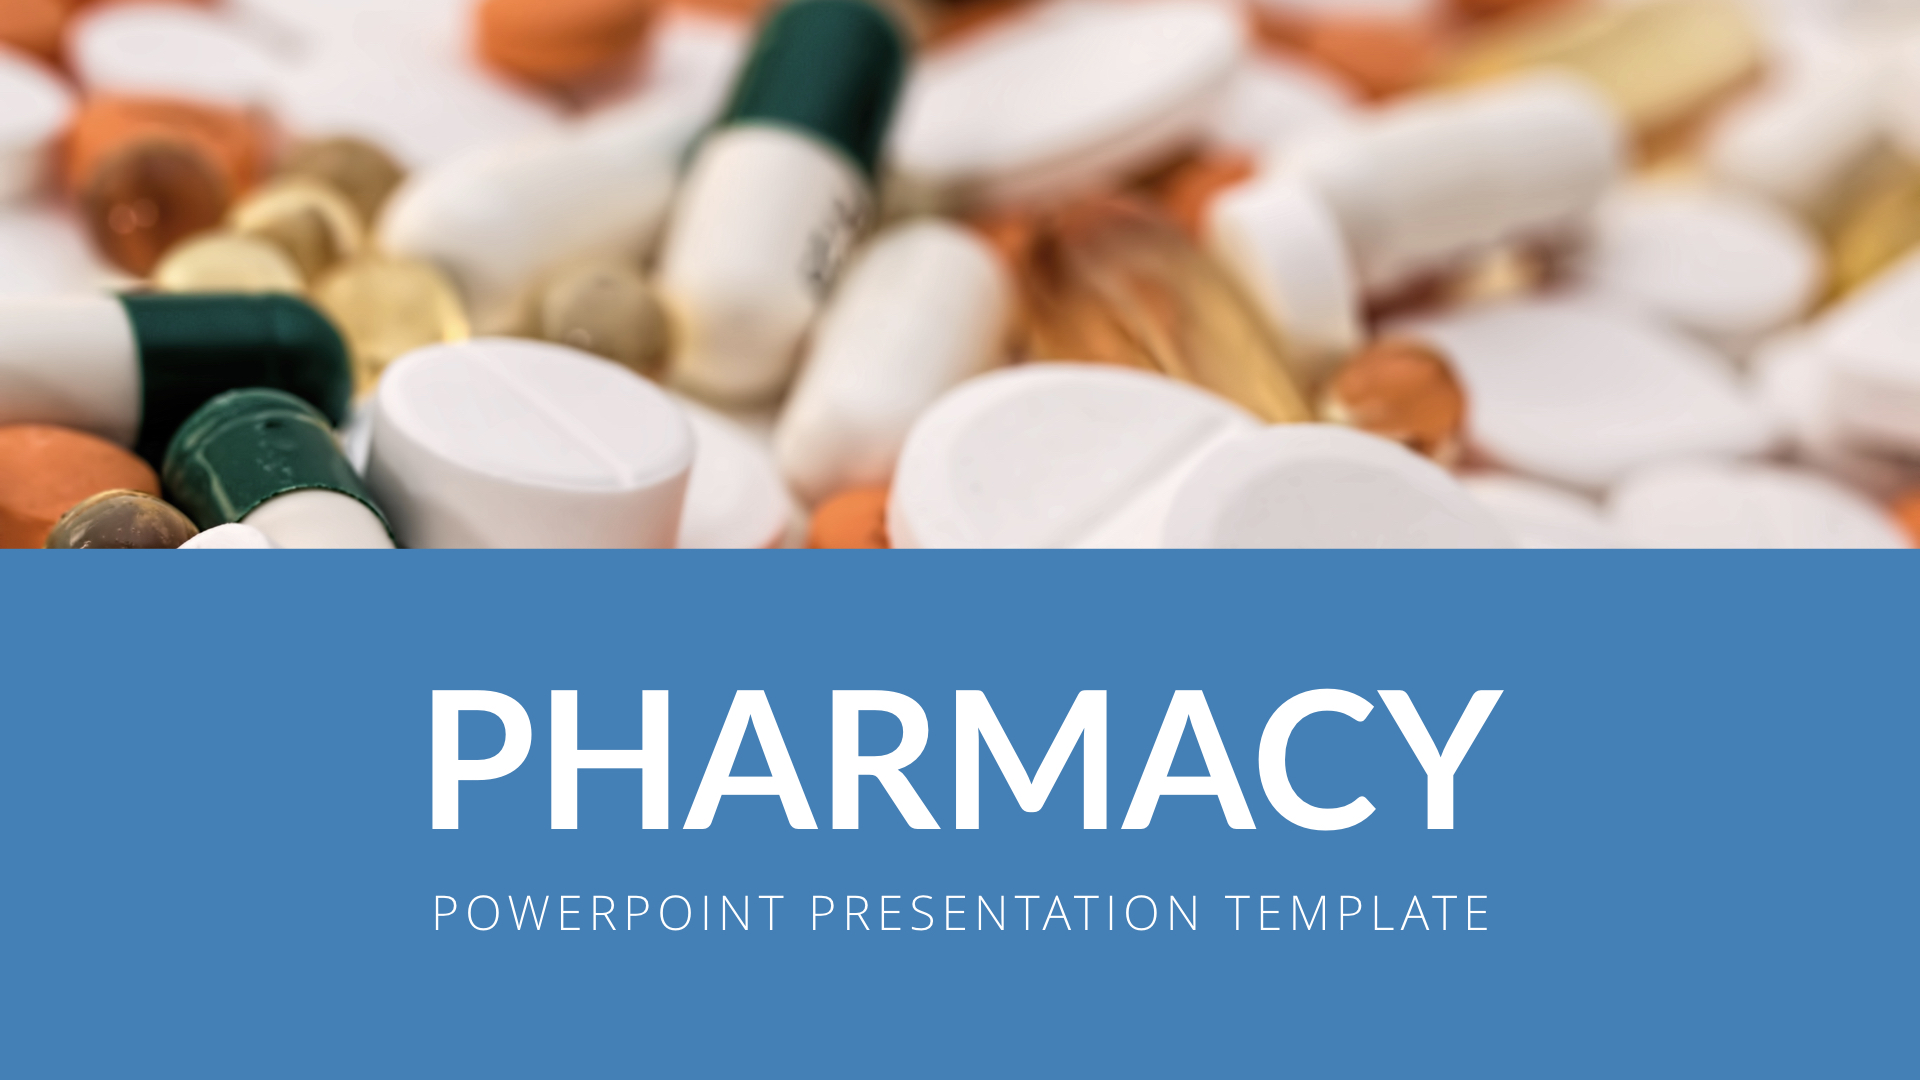 what does presentation mean in pharmacy